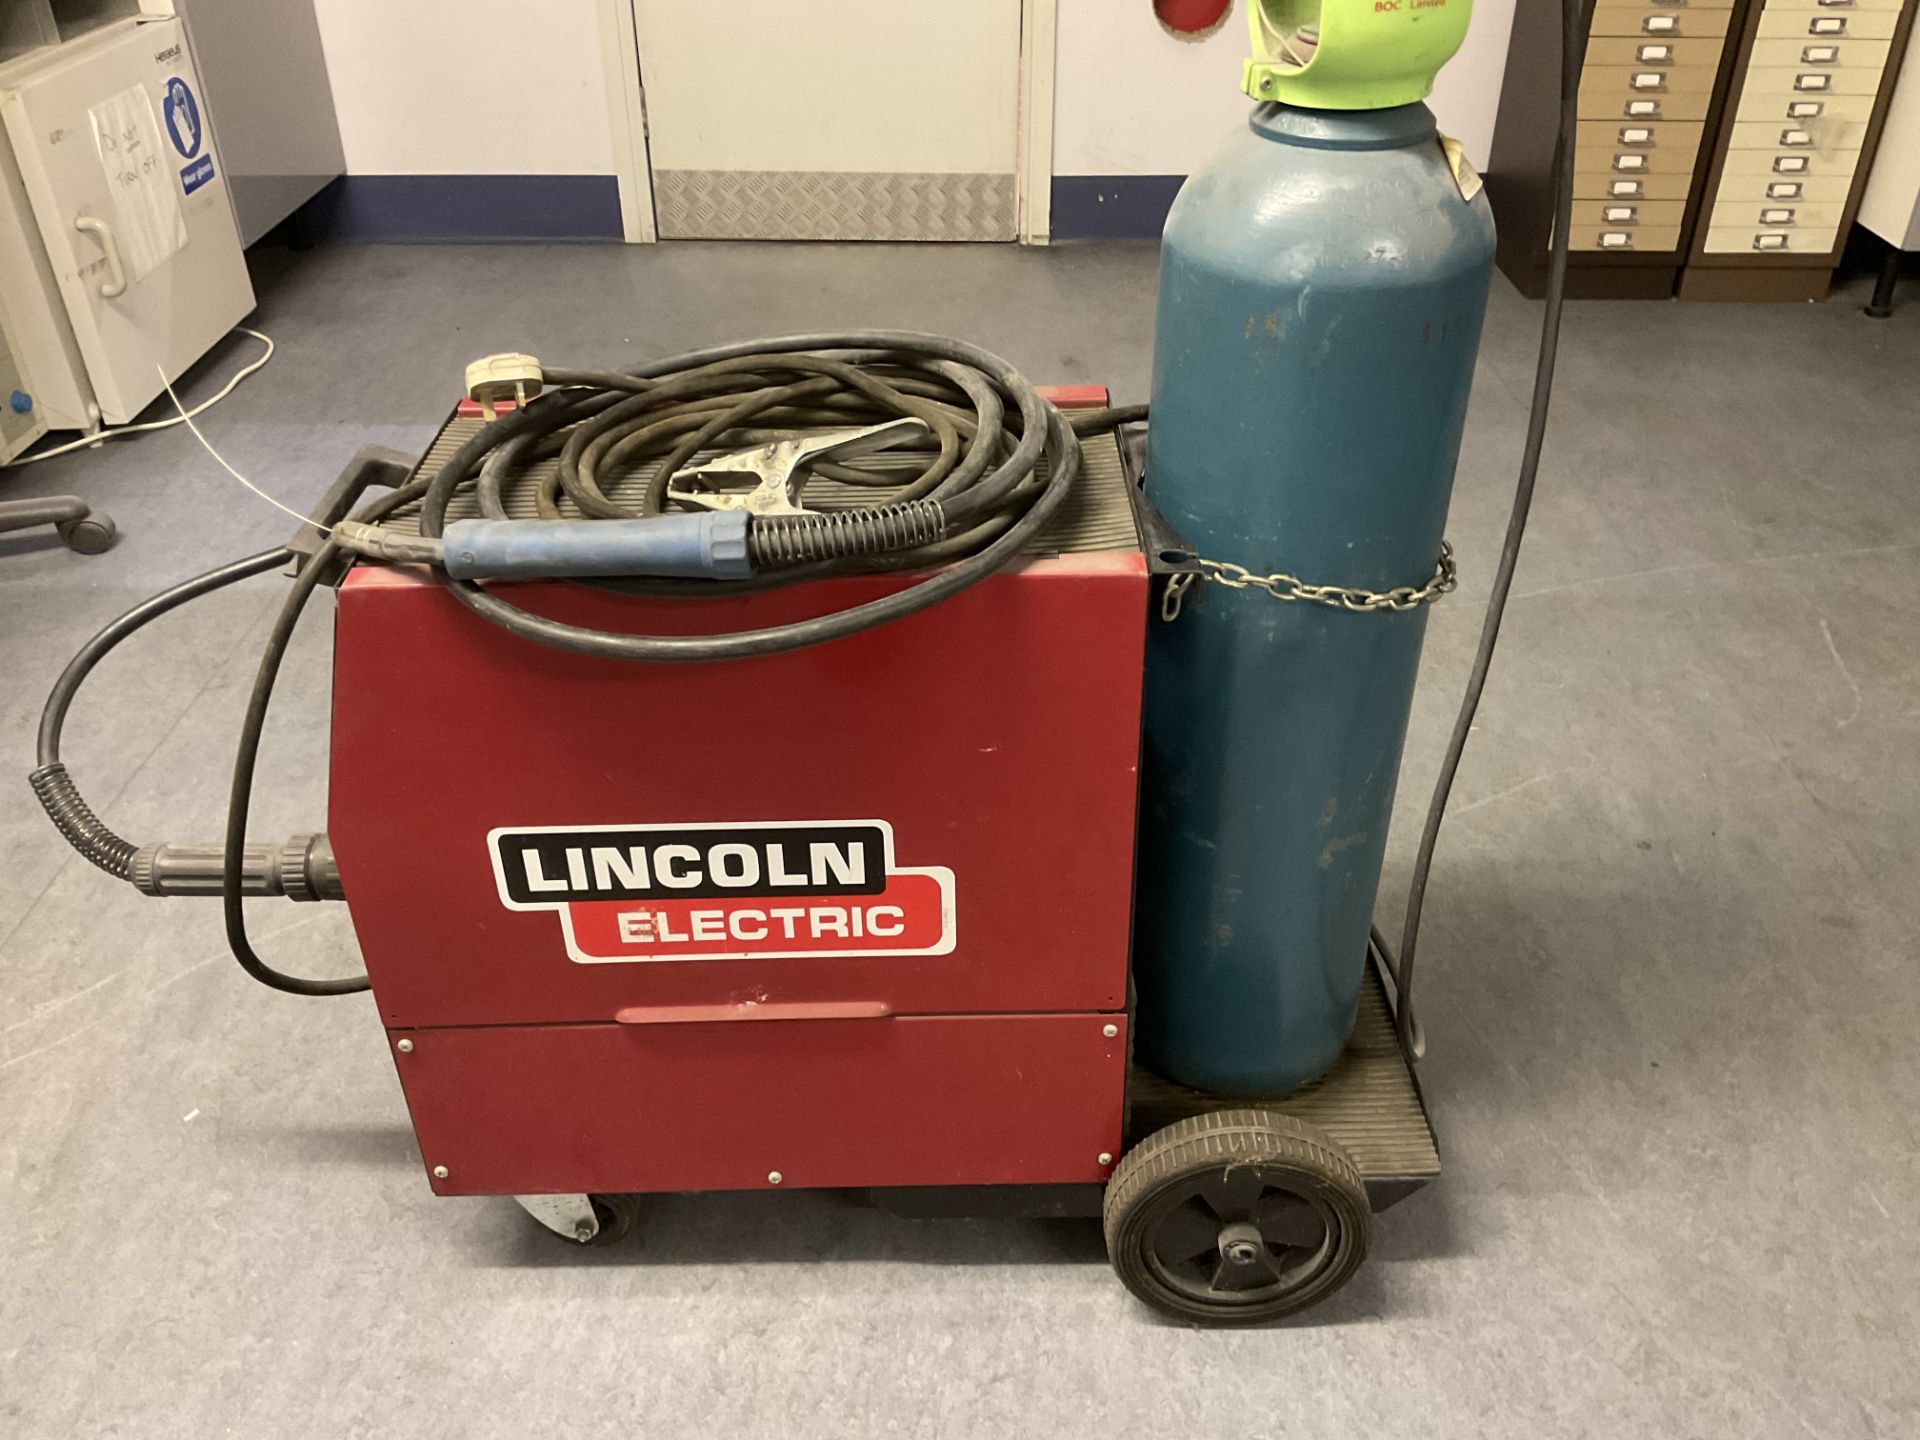 Lincoln Electric Mig Welder Compact 185 with Regulator - Image 5 of 10